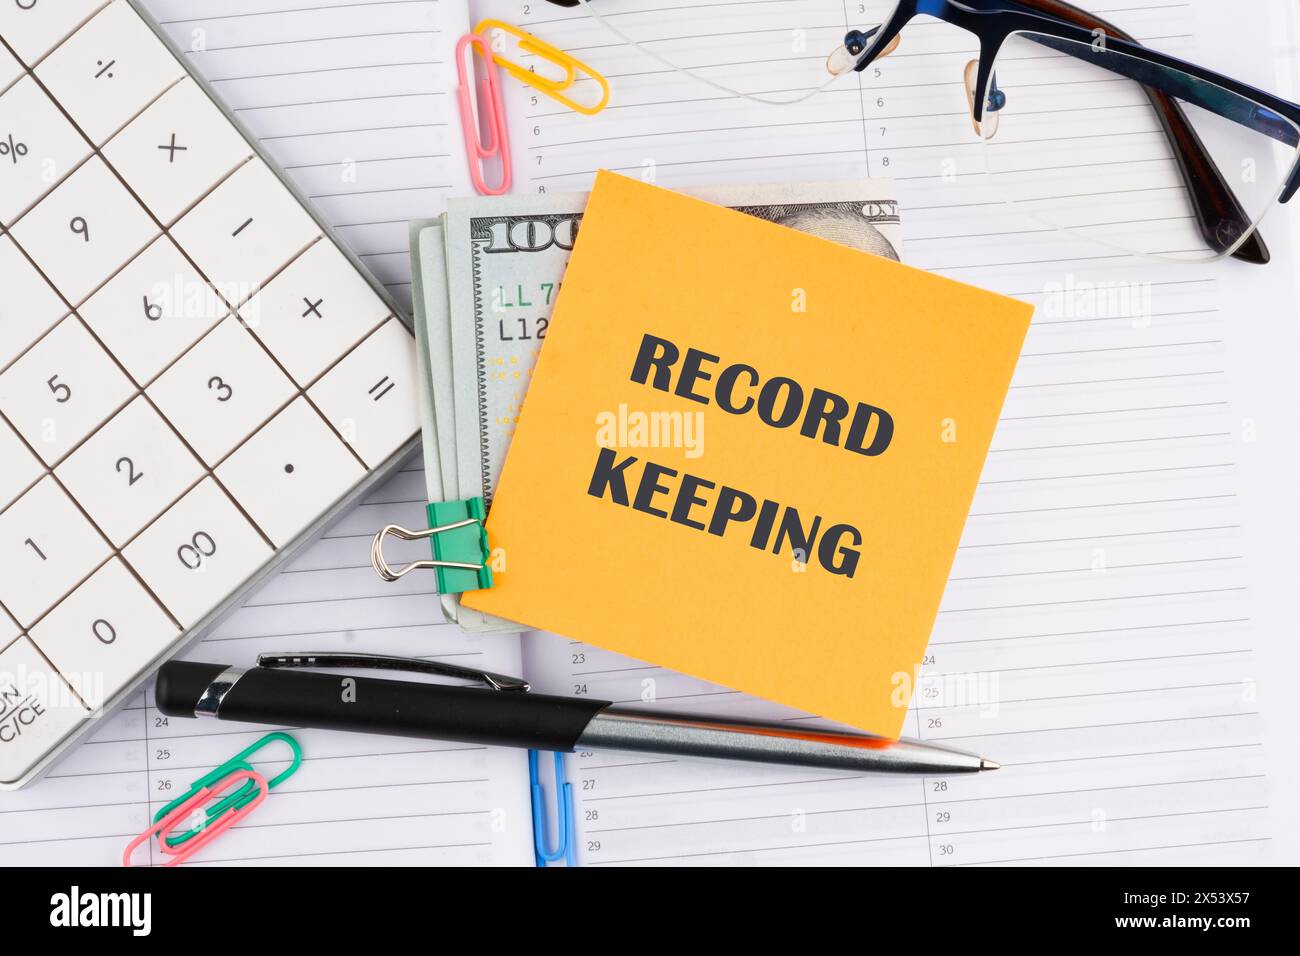 Record keeping text concept on a yellow sticker with money on a business notebook Stock Photo